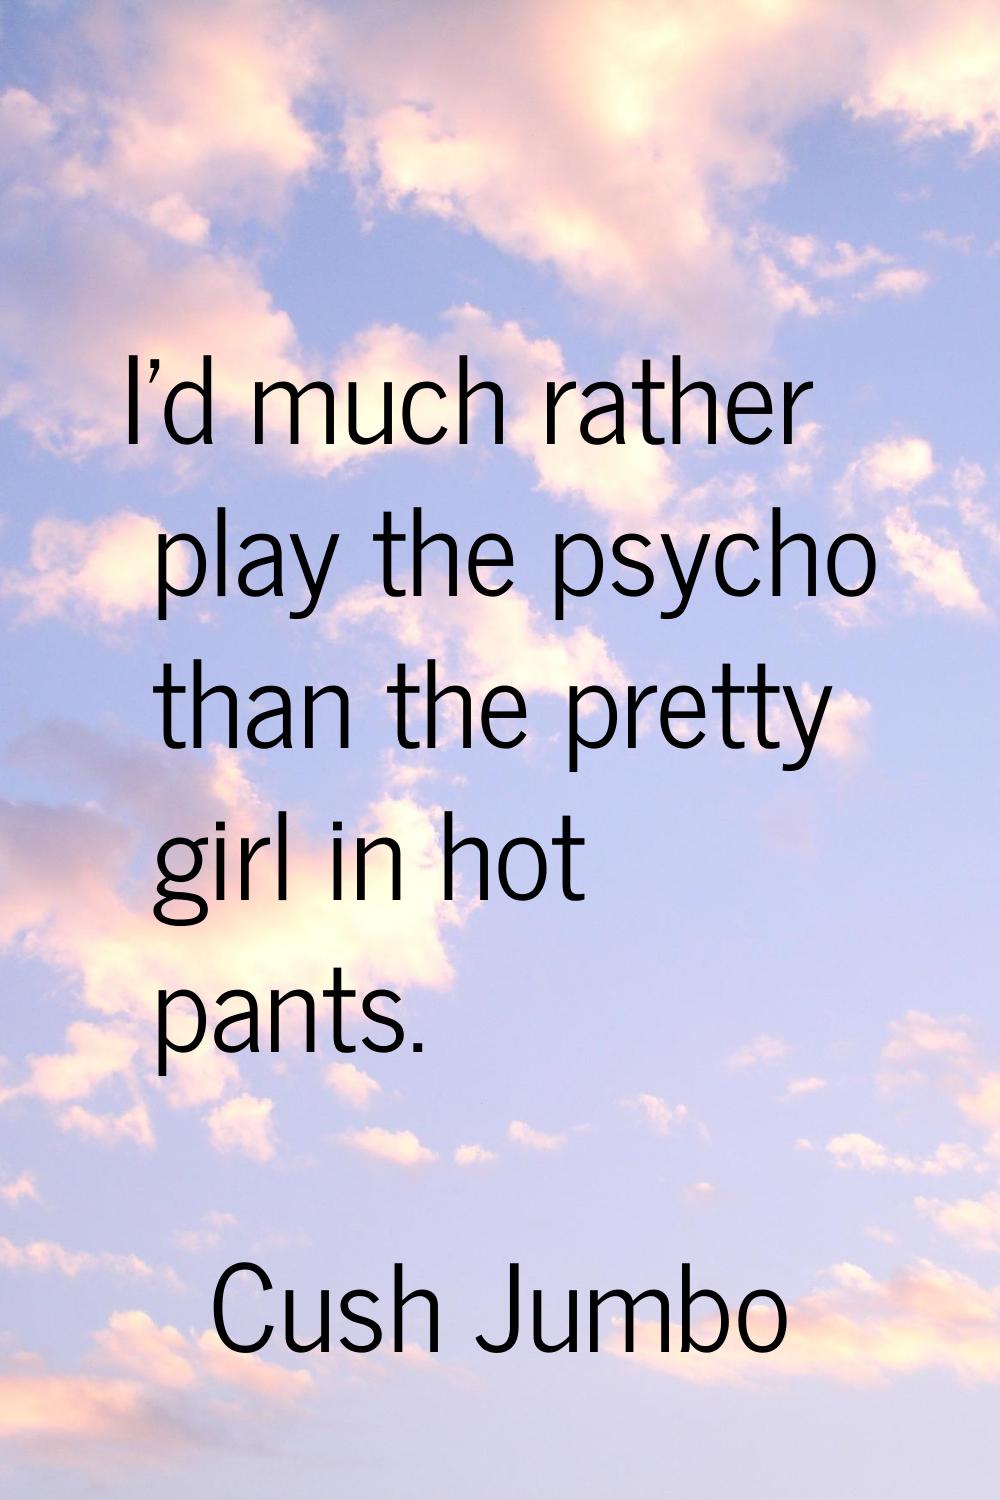 I'd much rather play the psycho than the pretty girl in hot pants.